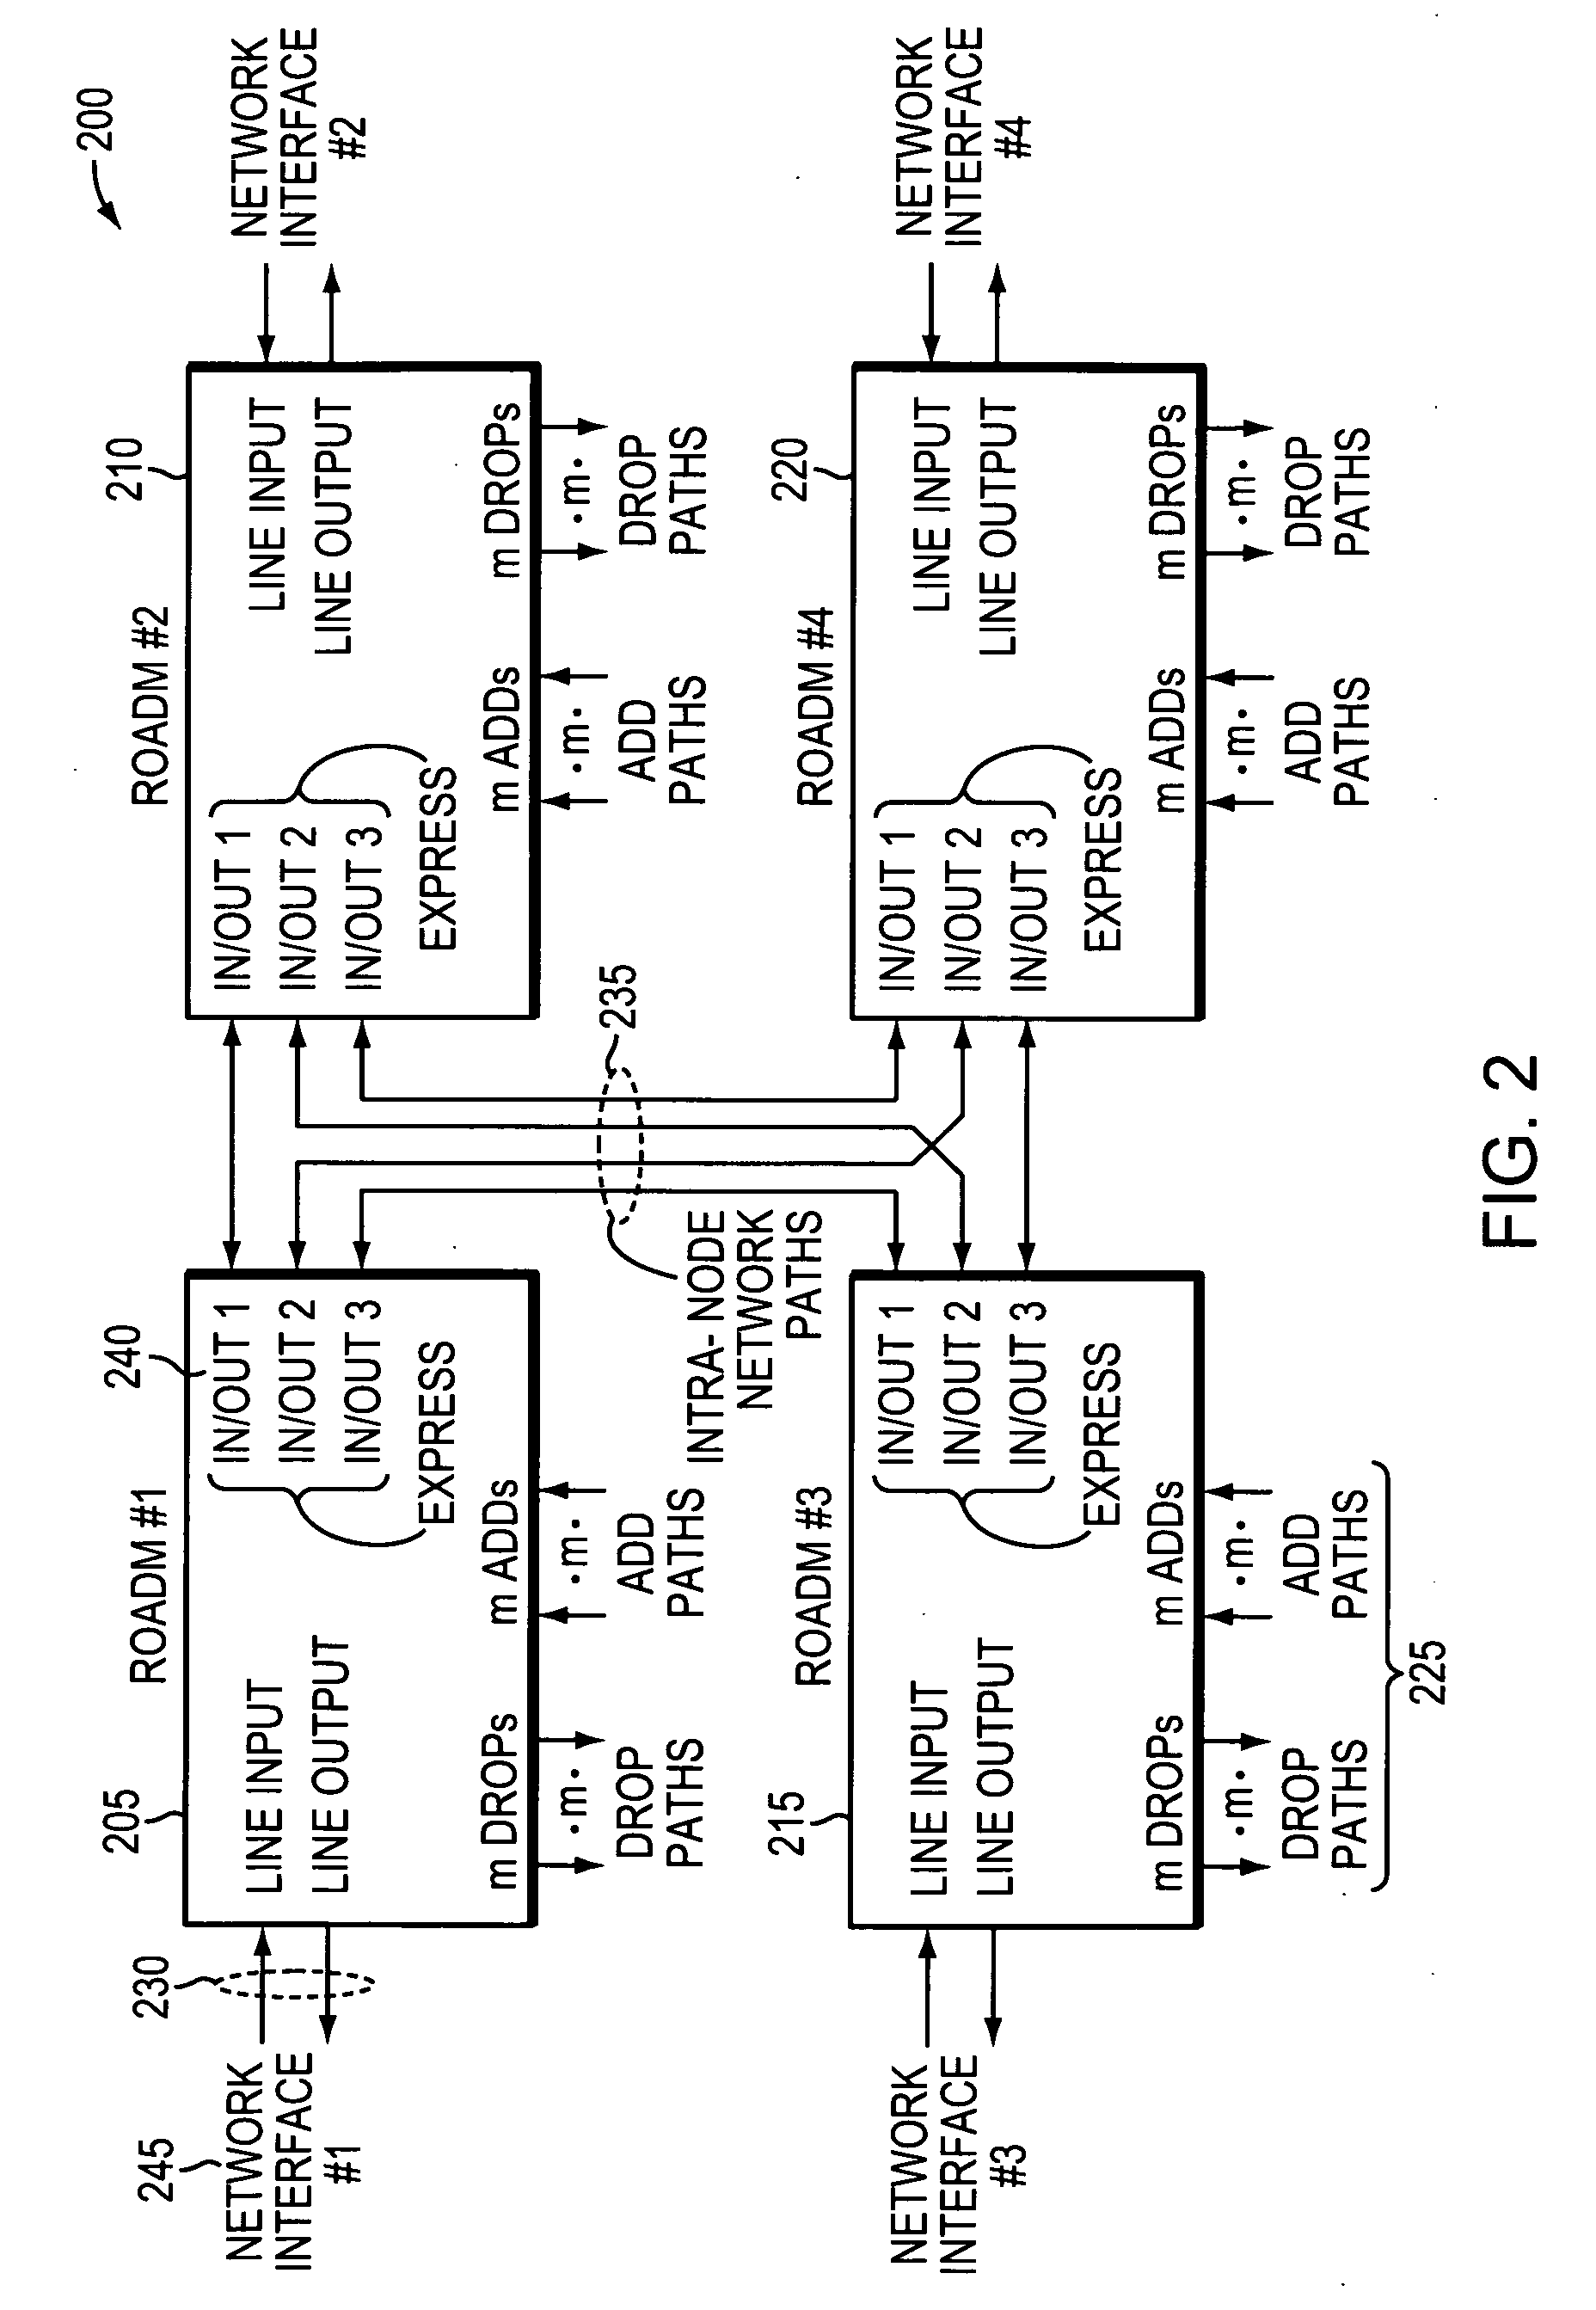 Methods and apparatus for constructing large wavelength selective switches using parallelism